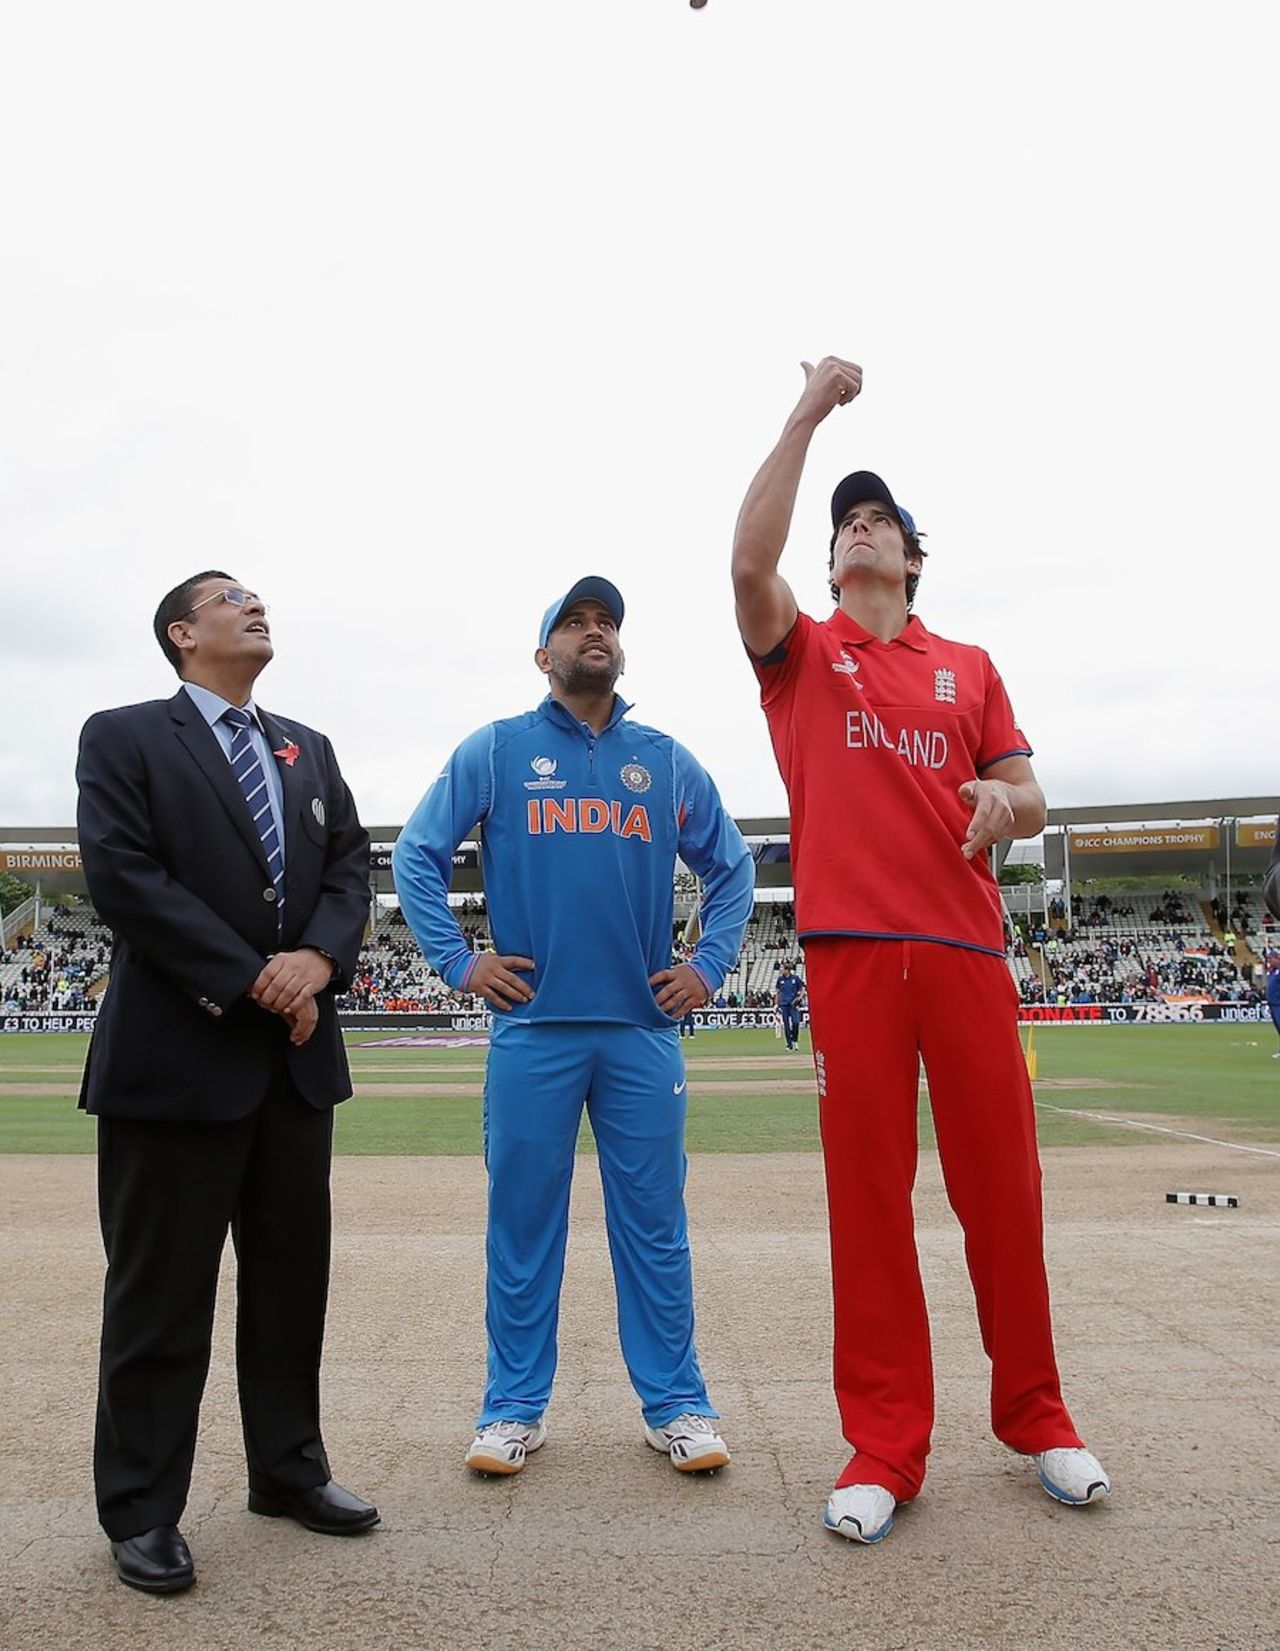 Alastair Cook and MS Dhoni at the toss, England v India, Champions Trophy final, Edgbaston, June 23, 2013